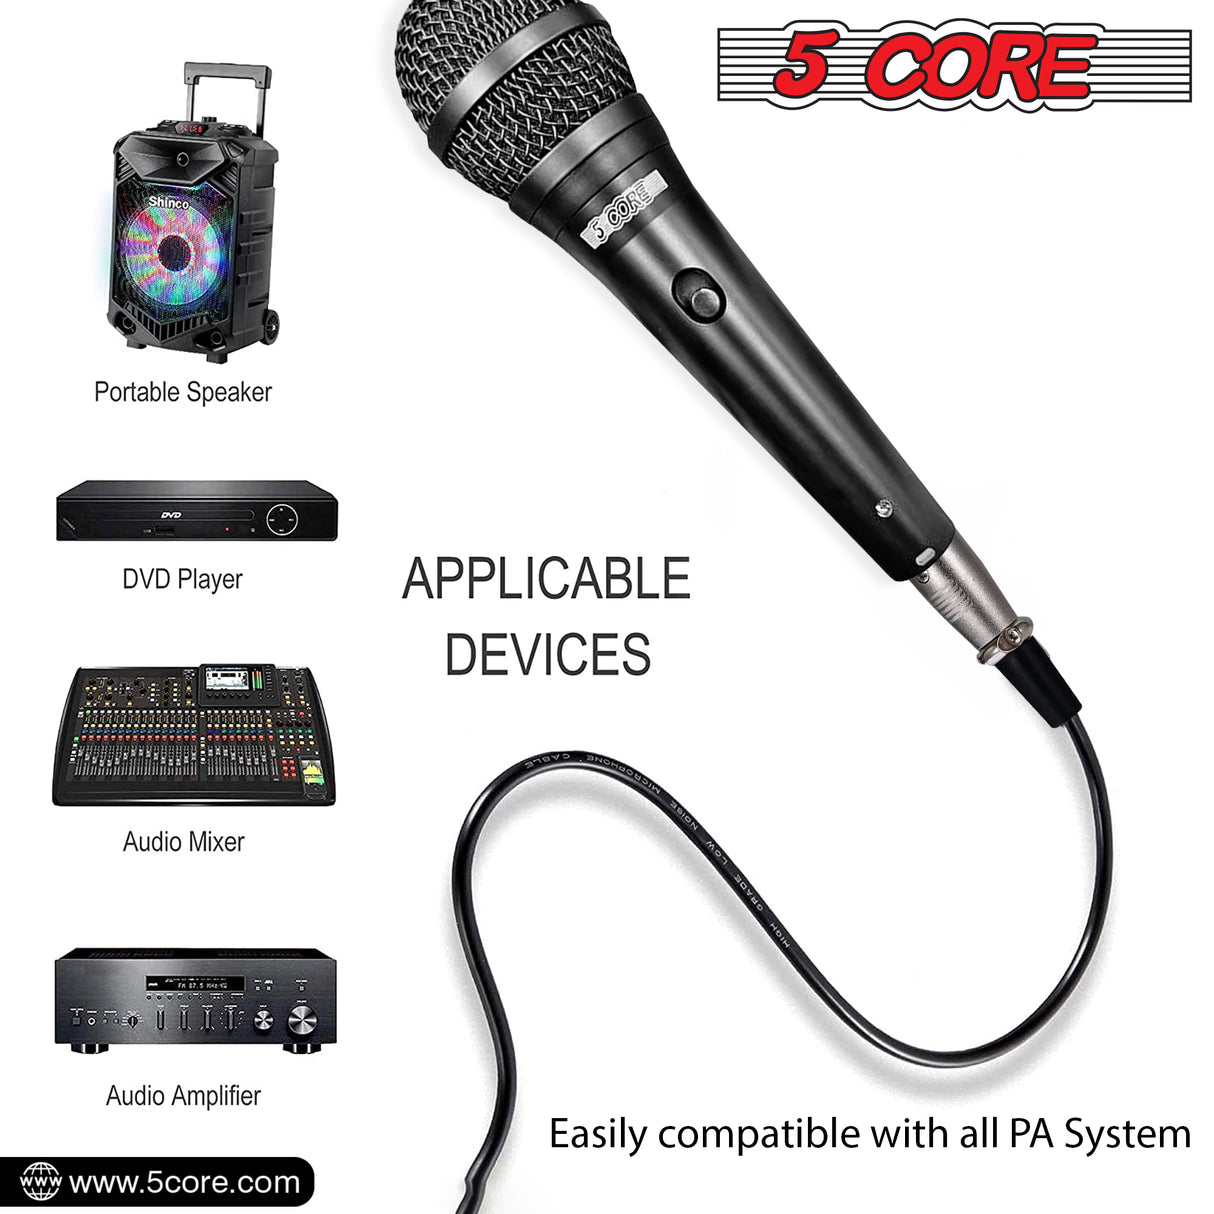 5 Core Foldable Tripod Mic Stand + Premium Vocal Dynamic Cardioid Mic Combo: Adjustable height, telescoping boom arm, secure tension lock. Includes 16ft XLR cable, mic clip, on/off switch. Ideal for karaoke MS 080 +ND58